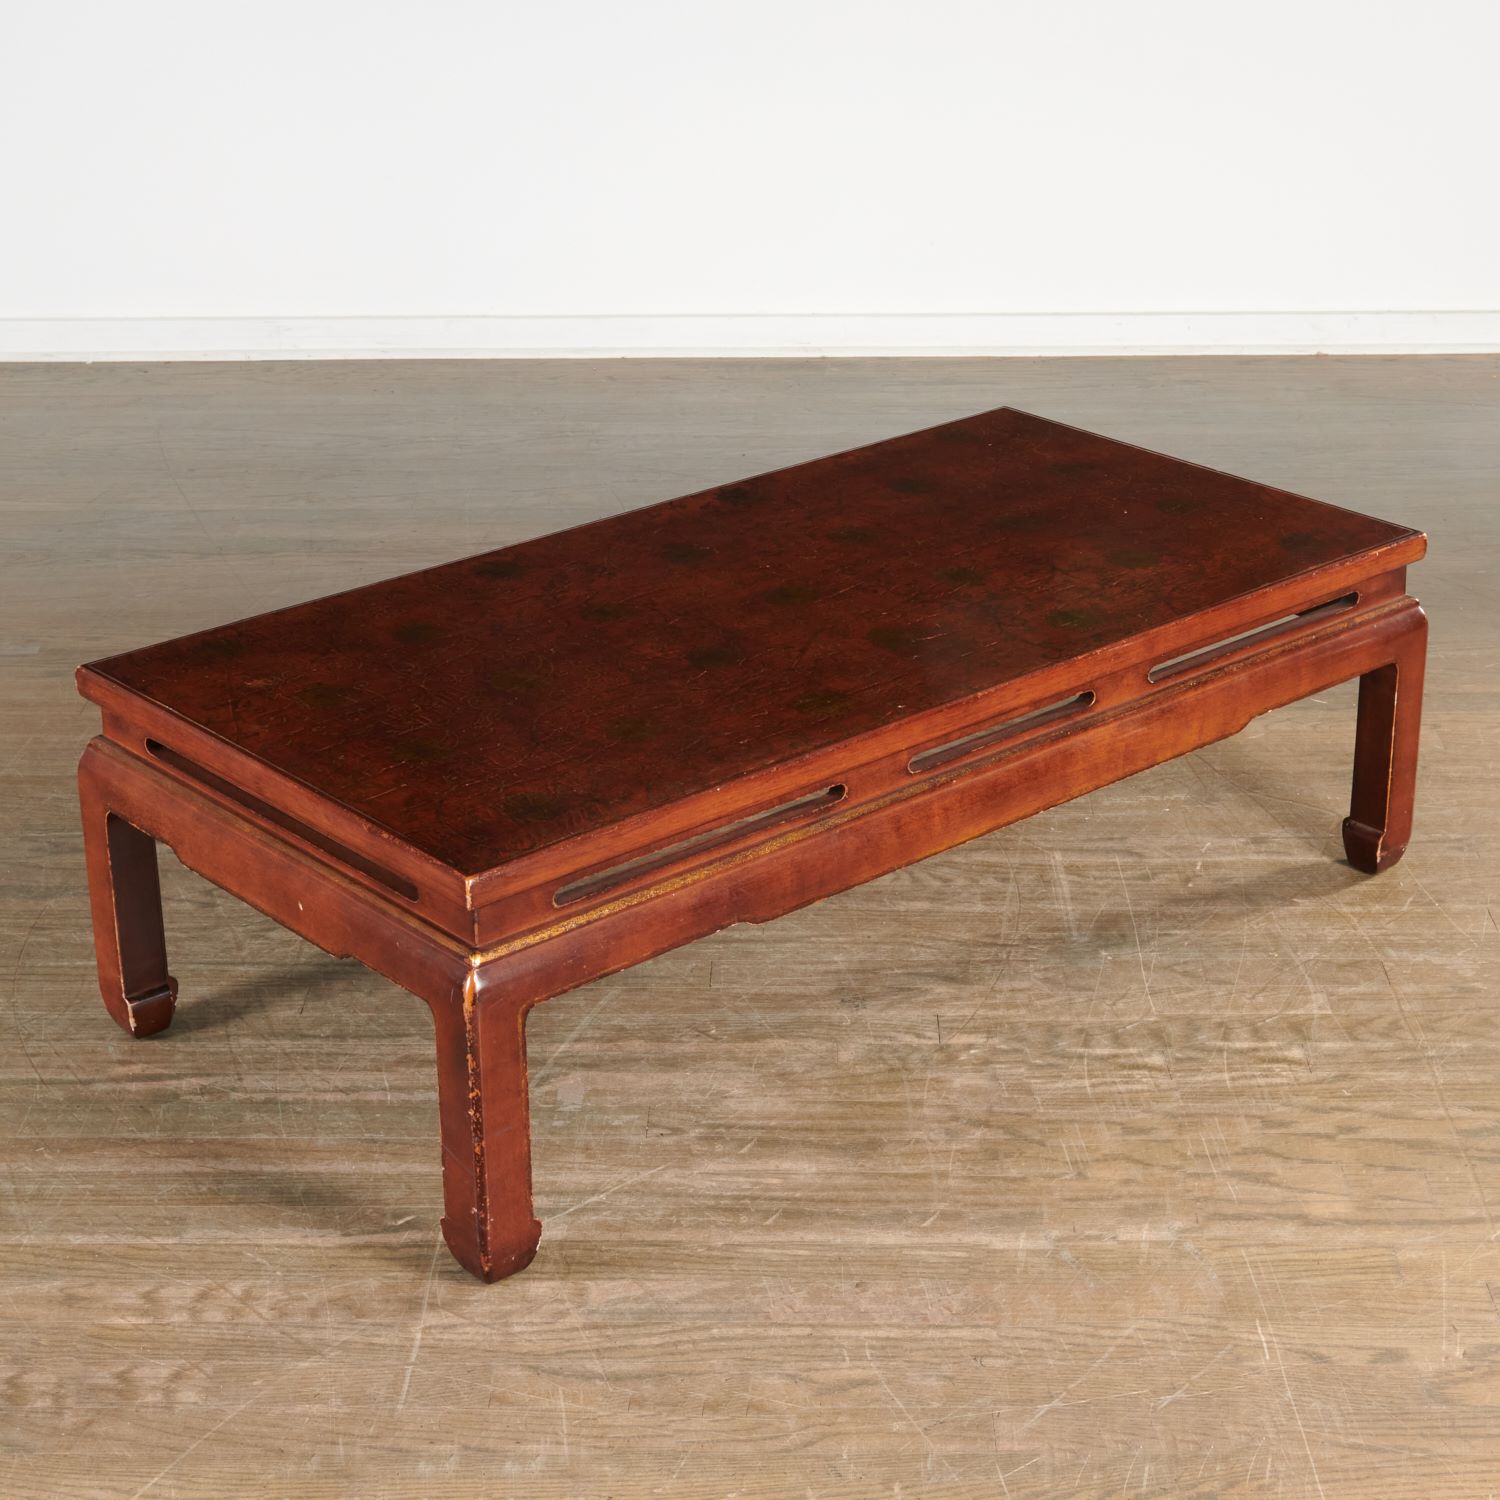 CHINESE LACQUERED KANG LOW TABLE 361d86